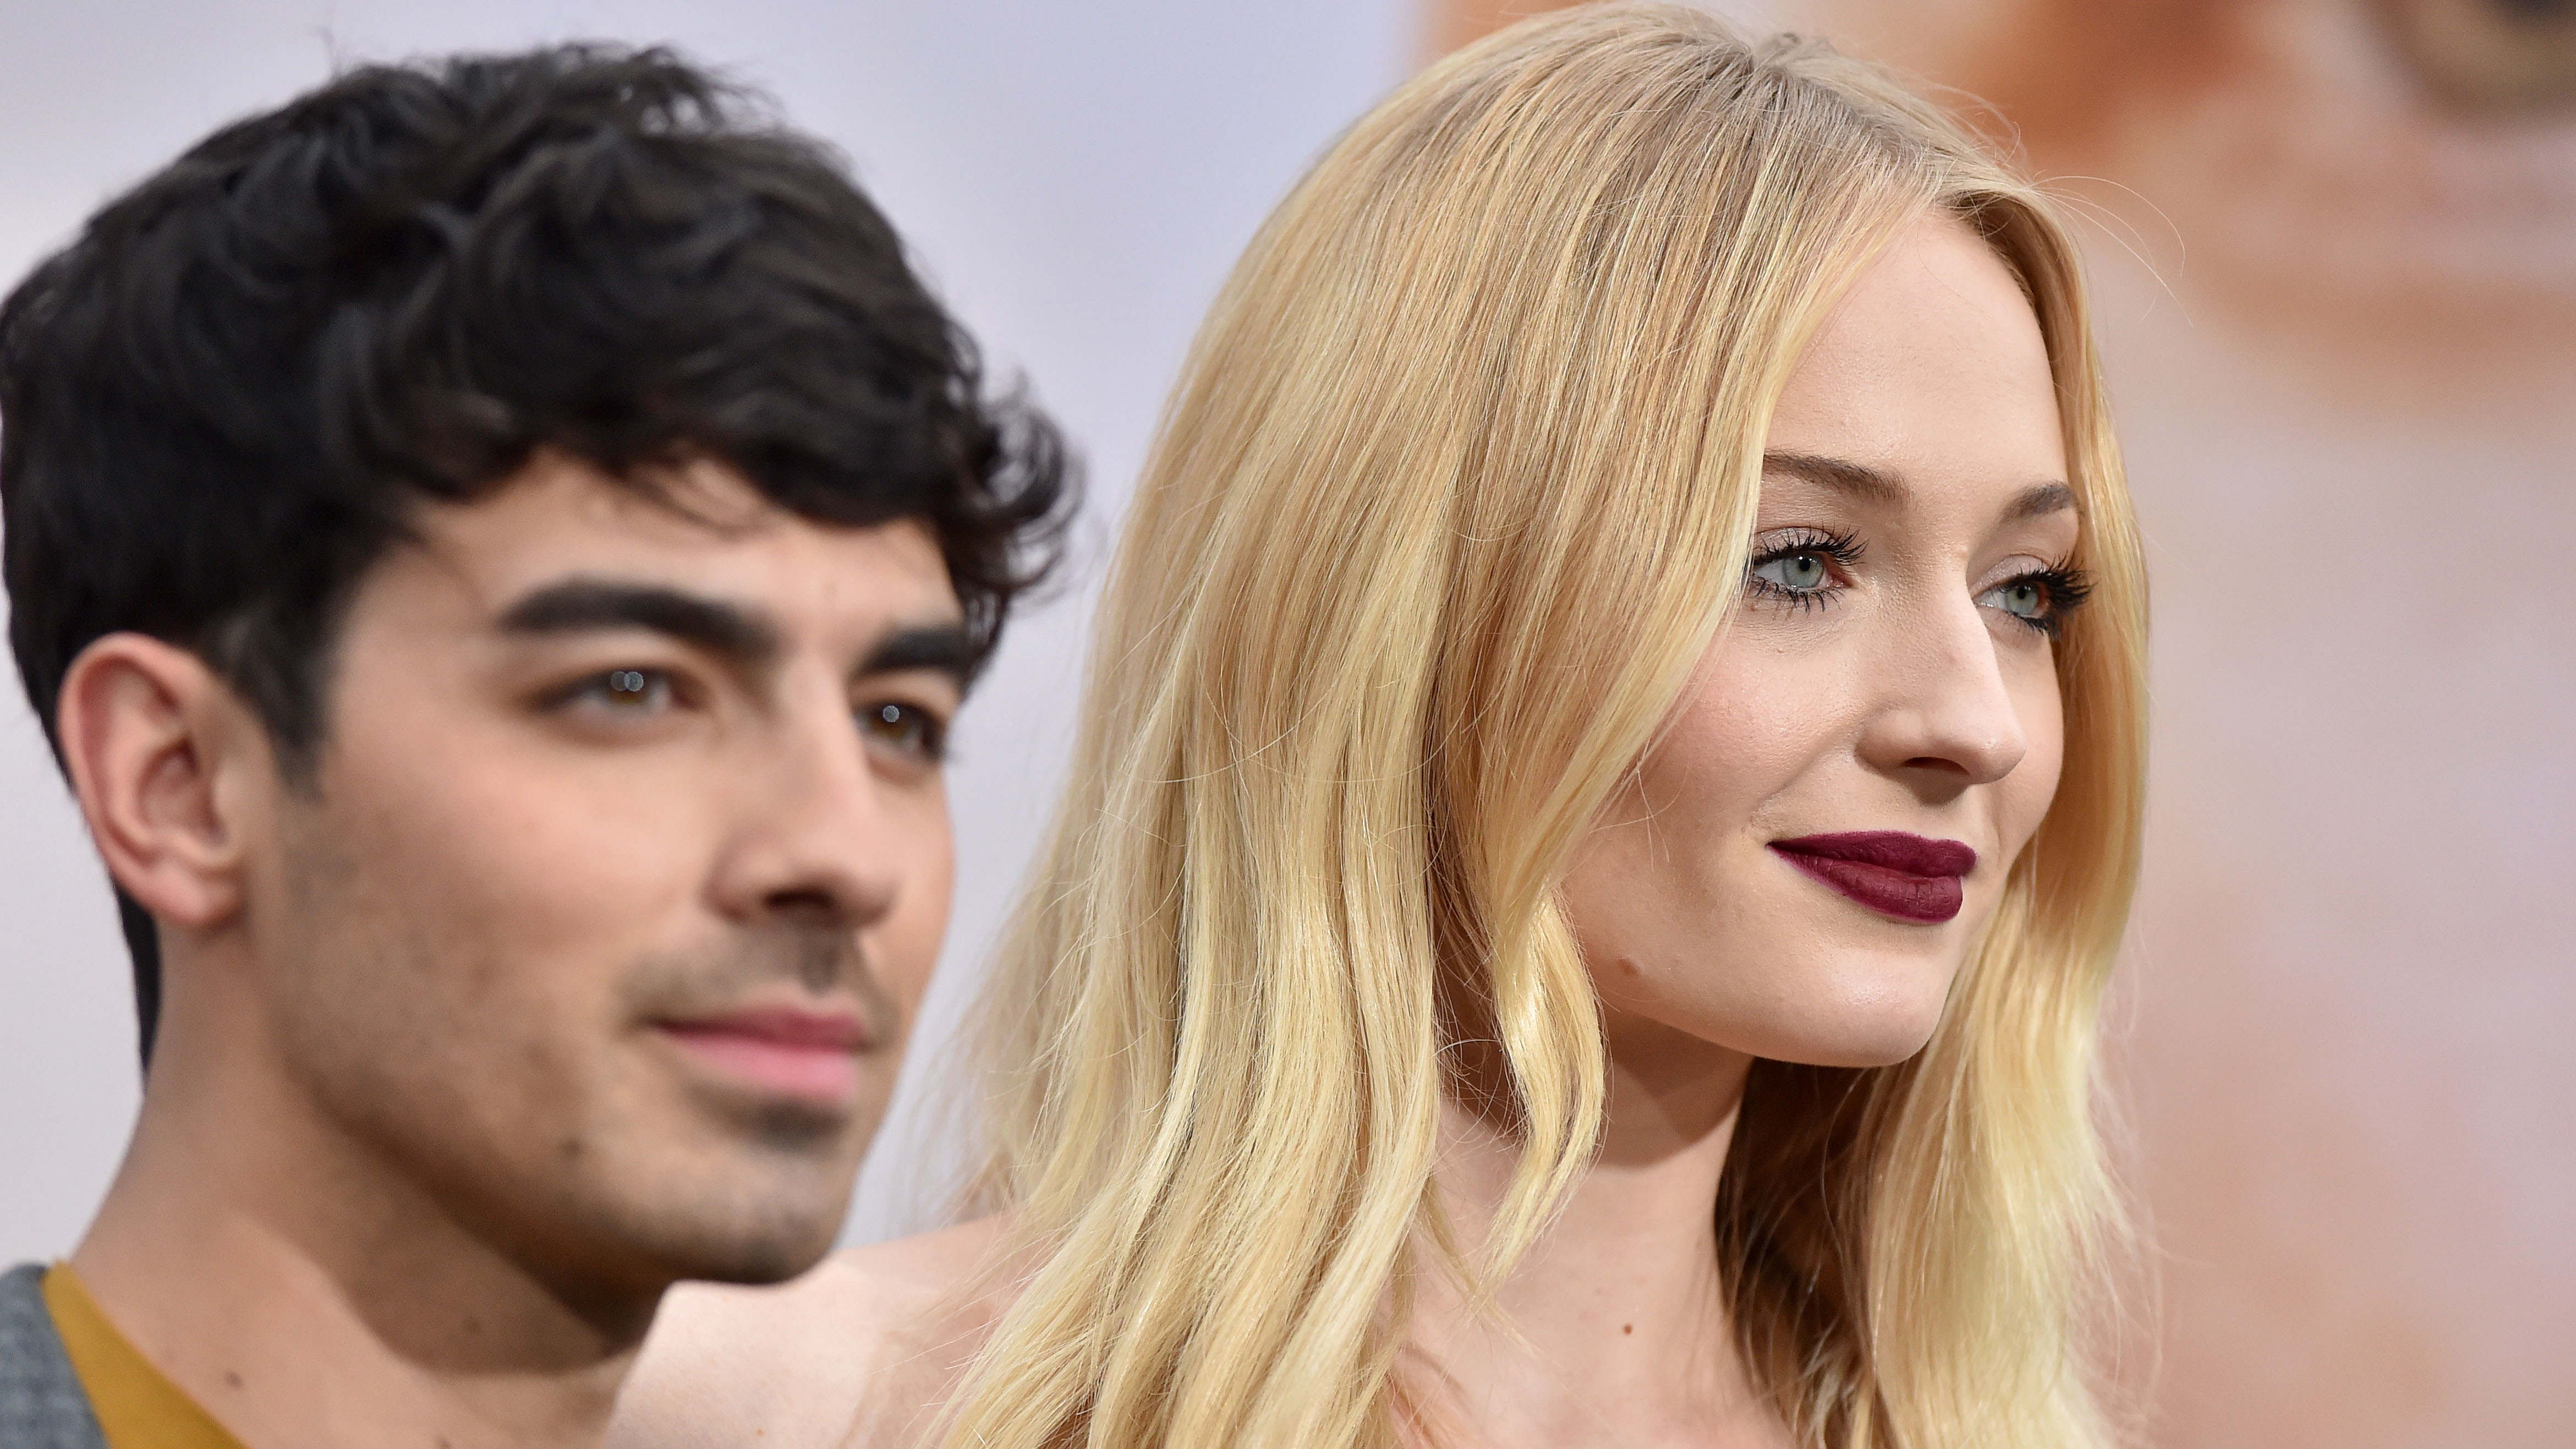 The First Close Look at Sophie Turner's Louis Vuitton Wedding